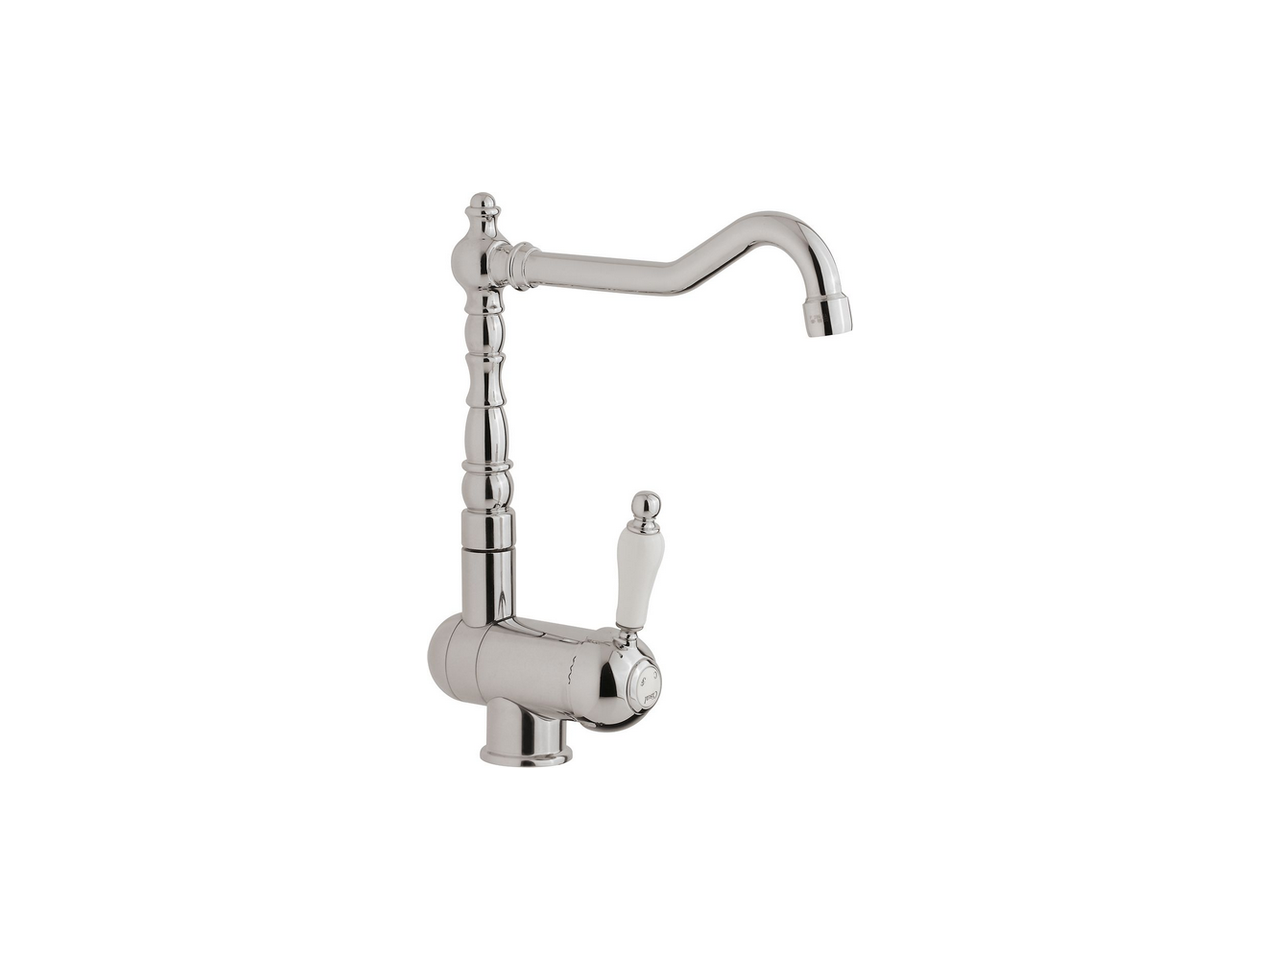 Single lever sink mixer with reclined spout ARCANA EMPRESS_EM001530 - v1